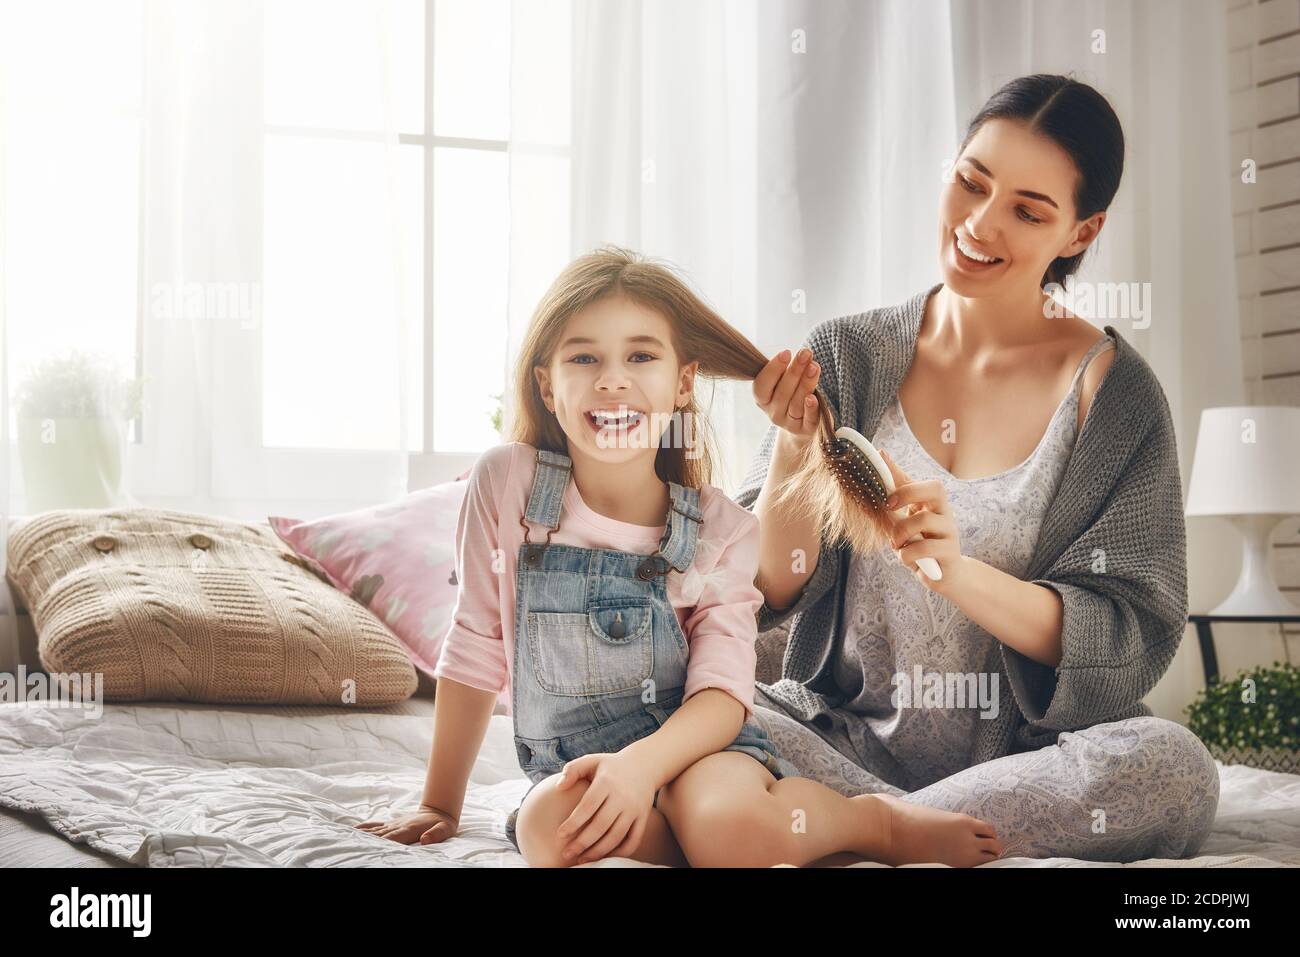 Happy loving family. Mother is combing her daughter's hair sitting on the bed in the room. Stock Photo